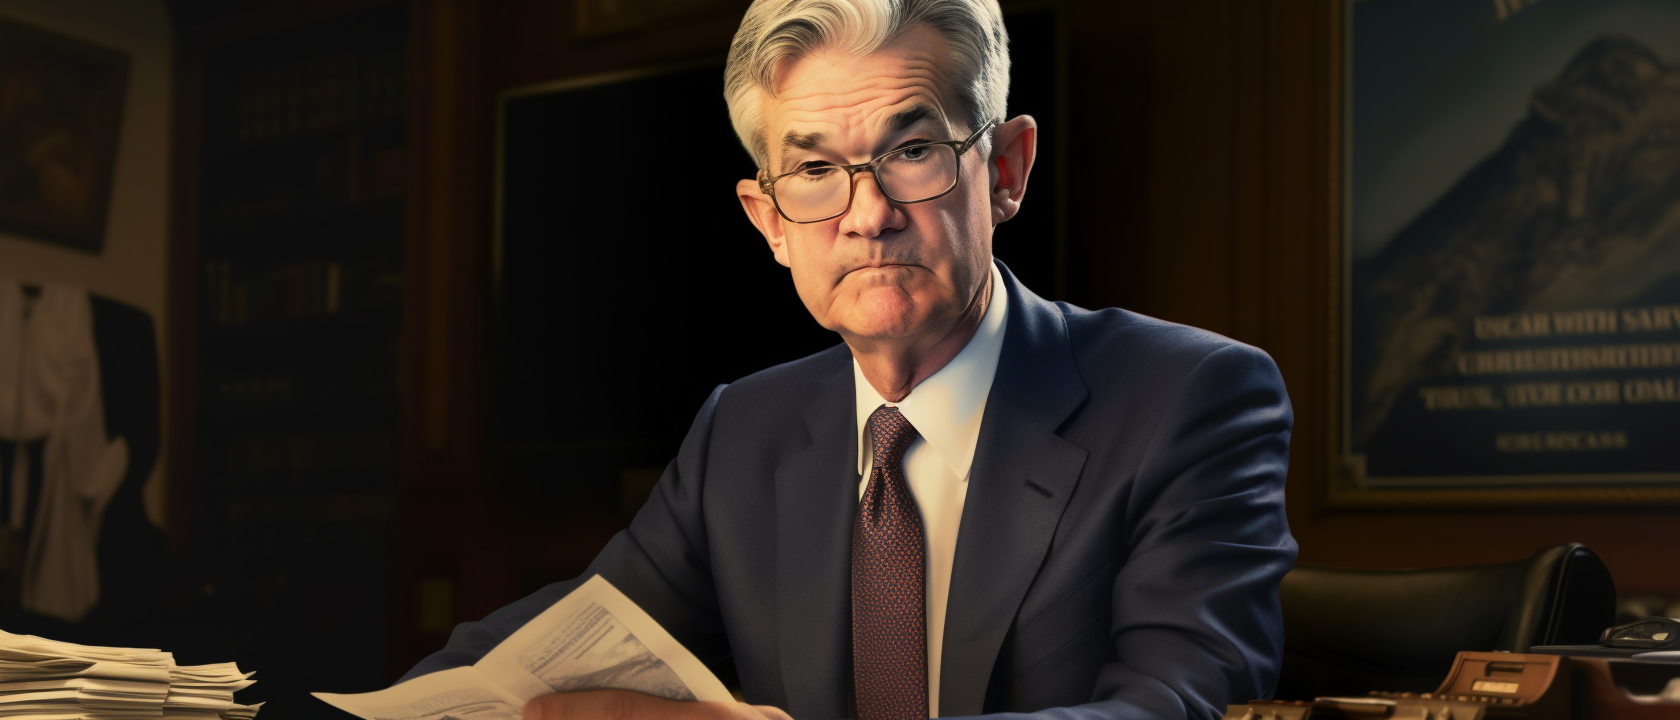 Fed Chair Jerome Powell Admits Unsustainable Fiscal Path and Bank Oversight Failures